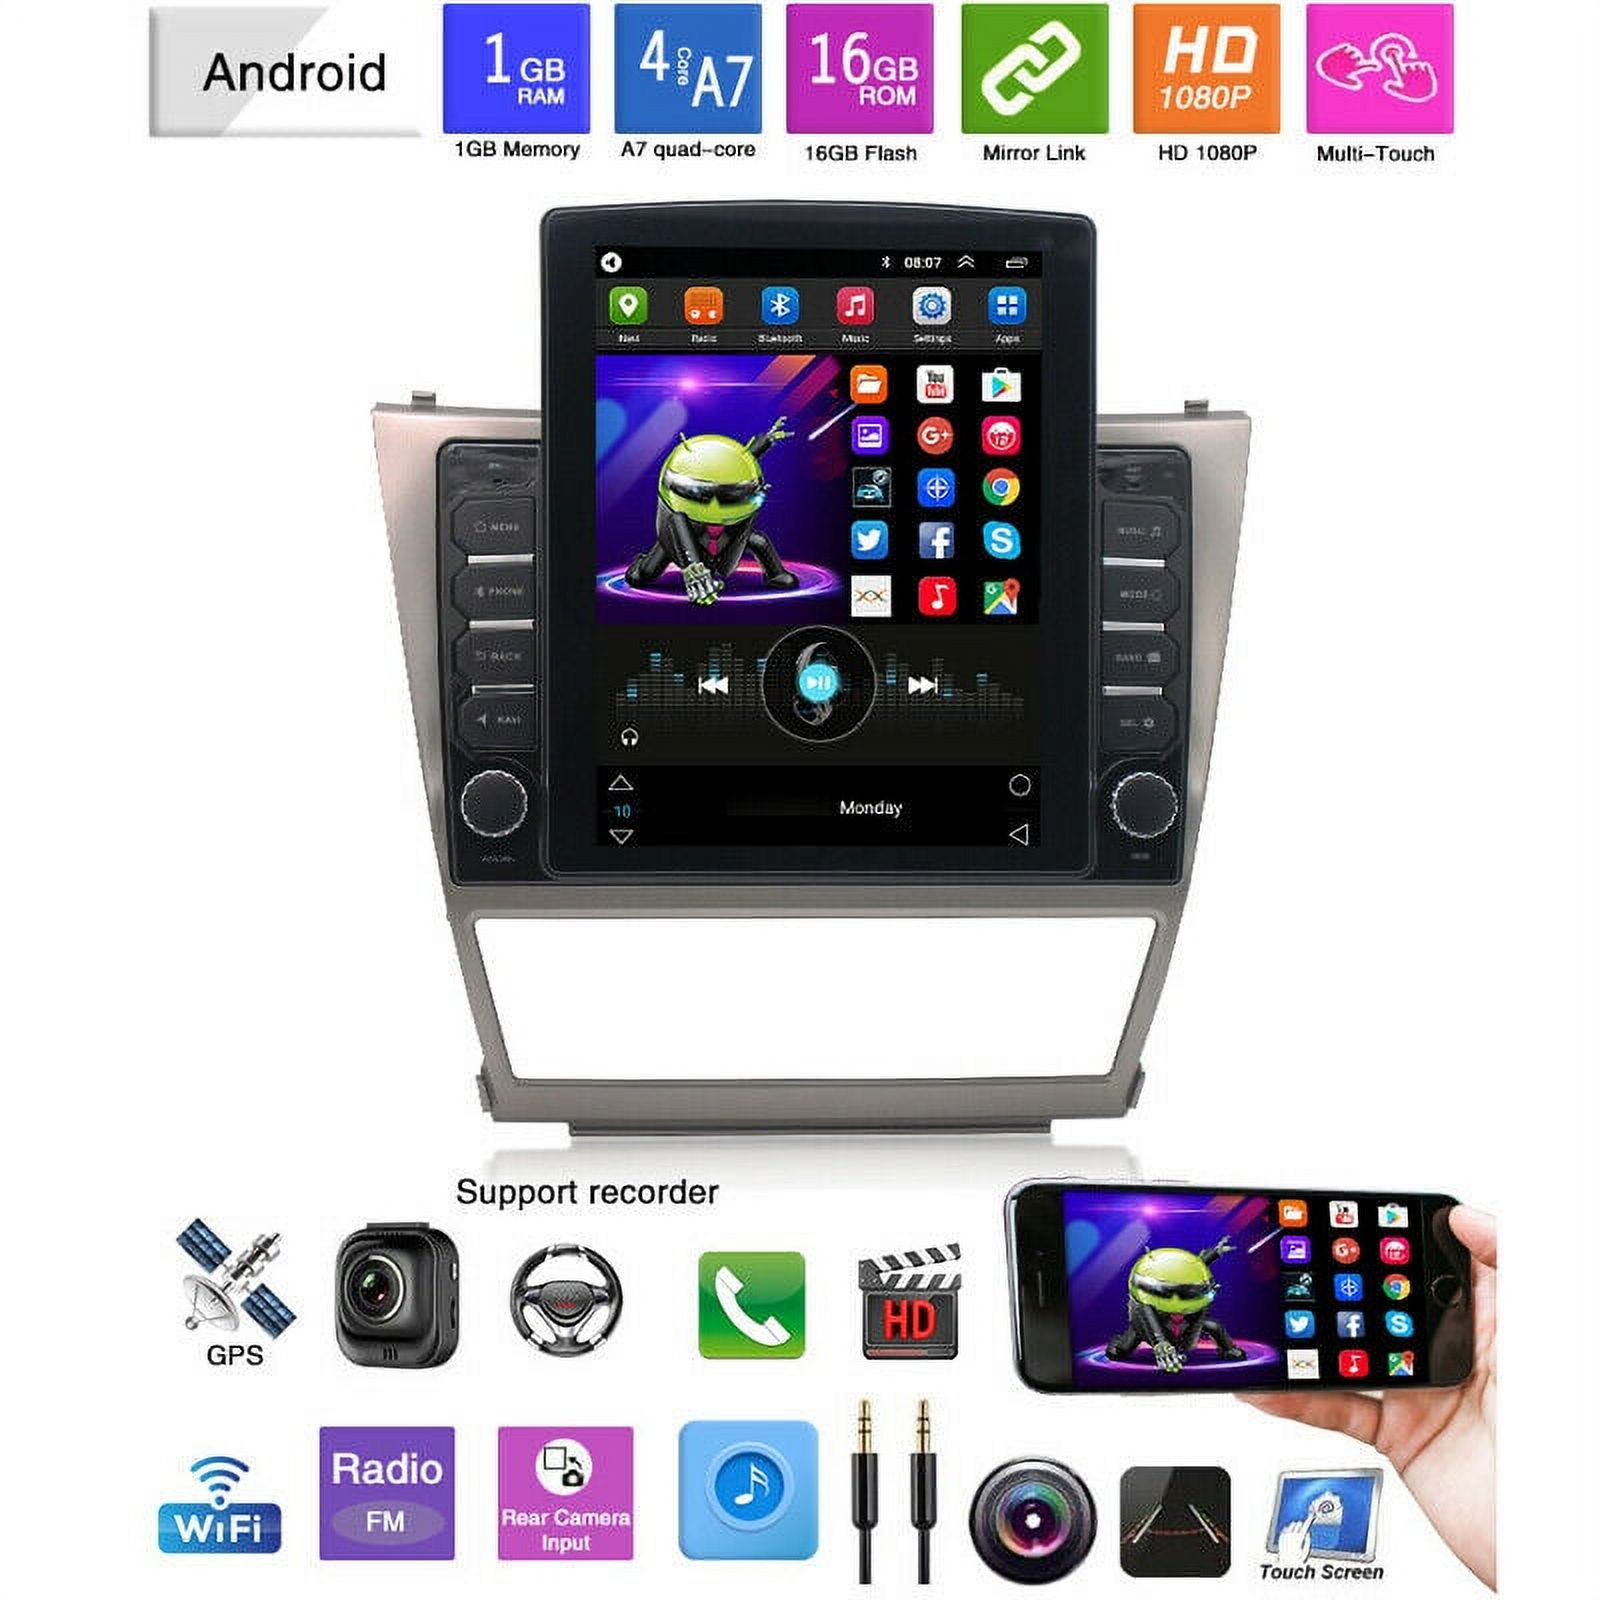 9.7" 2 Din Android 9.1 Car Stereo Radio GPS MP5 Player Fit For Toyota Camry 06-11 - image 3 of 7